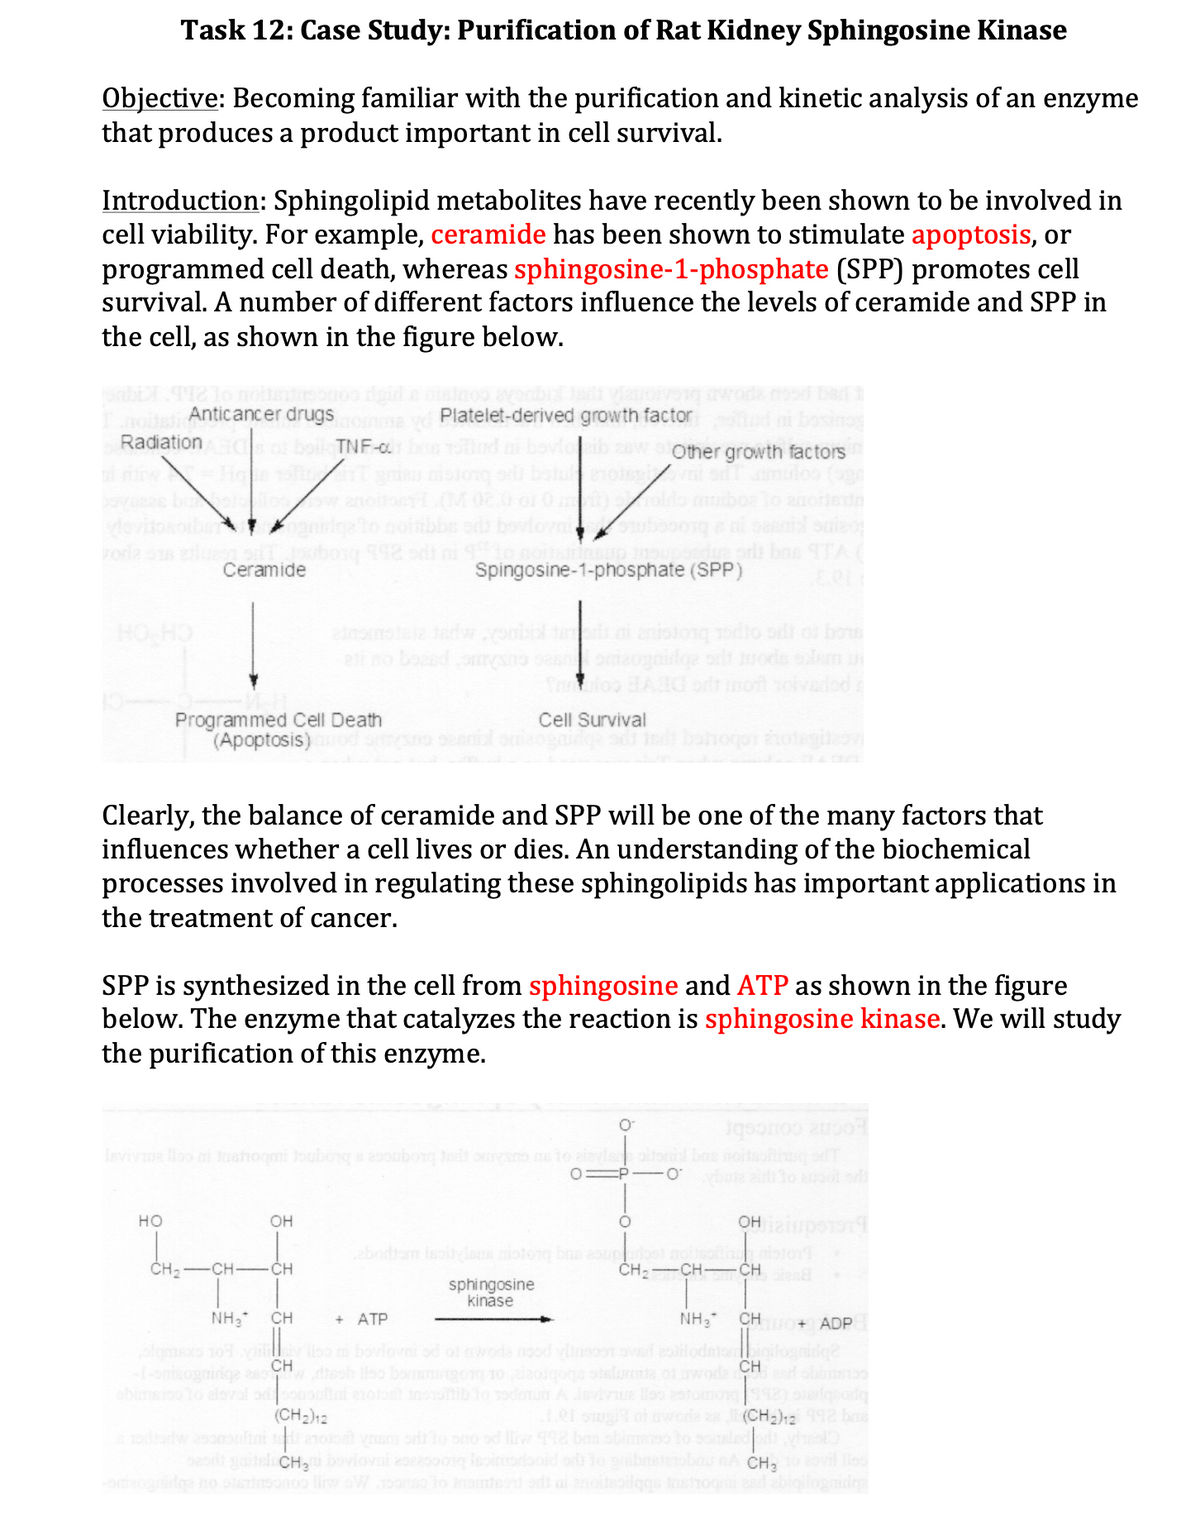 Task 12: Case Study: Purification of Rat Kidney Sphingosine Kinase
Objective: Becoming familiar with the purification and kinetic analysis of an enzyme
that produces a product important in cell survival.
Introduction: Sphingolipid metabolites have recently been shown to be involved in
cell viability. For example, ceramide has been shown to stimulate apoptosis, or
programmed cell death, whereas sphingosine-1-phosphate (SPP) promotes cell
survival. A number of different factors influence the levels of ceramide and SPP in
the cell, as shown in the figure below.
Anticancer drugsomme d Platelet-derived growth factor fud ni boxing
Radiation Ads of boil TNF-a.
Other growth factors
motor (4 02.0 or 0 m)
oldo
vode sus eluen oi, Joobong 792 odi ni 9° to noitsinsup roupsedre or box ITA (
Ceramide
Spingosine-1-phosphate (SPP)
HO HO
Programmed Cell Death
(Apoptosis)od orth
atnomstura tardw.yombil temat ni anistong modto odi of bors
ali no board omysho sanomzognirige ont mode solem in
Yanolo BANC or moft toivadod a
Clearly, the balance of ceramide and SPP will be one of the many factors that
influences whether a cell lives or dies. An understanding of the biochemical
processes involved in regulating these sphingolipids has important applications in
the treatment of cancer.
HO
SPP is synthesized in the cell from sphingosine and ATP as shown in the figure
below. The enzyme that catalyzes the reaction is sphingosine kinase. We will study
the purification of this enzyme.
Cell Survival
cogaidoe sdi indi bahoqui anotagiteov
sono 2000
Invivius lloo ni ushoqni bouborga asouborg tadt omvano na to elevisce oitonibl bas noitsofting of
-Obute aid to anoot od
O=P
OH
CH₂-CH- -CH
O
он aiuротот?
abodtom ispitylaus nistong bra asupurtost nollsoft istori
CH₂-CH-CHE
sphingosine
kinase
NH₂* CH
+ ATP
NH₂
CHA ADP
olgmaxs 104 yily liso mi bovlovni od of wors nood vilnoot ovad estilodator
-1-onizognidge as CH
w disob lleo berunsigong 10 juizolqoqs sisturcite of awode CH
obiumino to sloval odconsufint exotont moroftib to todmun A devive liso estomong (998) oledgeadq
(CH₂)12
1.01 sugil of awora as (CH₂)12 992 bas
todiarw zoontlini soli exoral vason si to ono od lliw 198 ban obimsiso to sonsindo virolo
basit guitsli CH₂i bovlovni 2082soong isoimodooid oda to guibretersbou nA CH₂ 10 eovil leo
-oxisognidas no slitsono liw Woonso to Inomtead siit al anoitepilqgs Instrogmi ead abigilogmulga